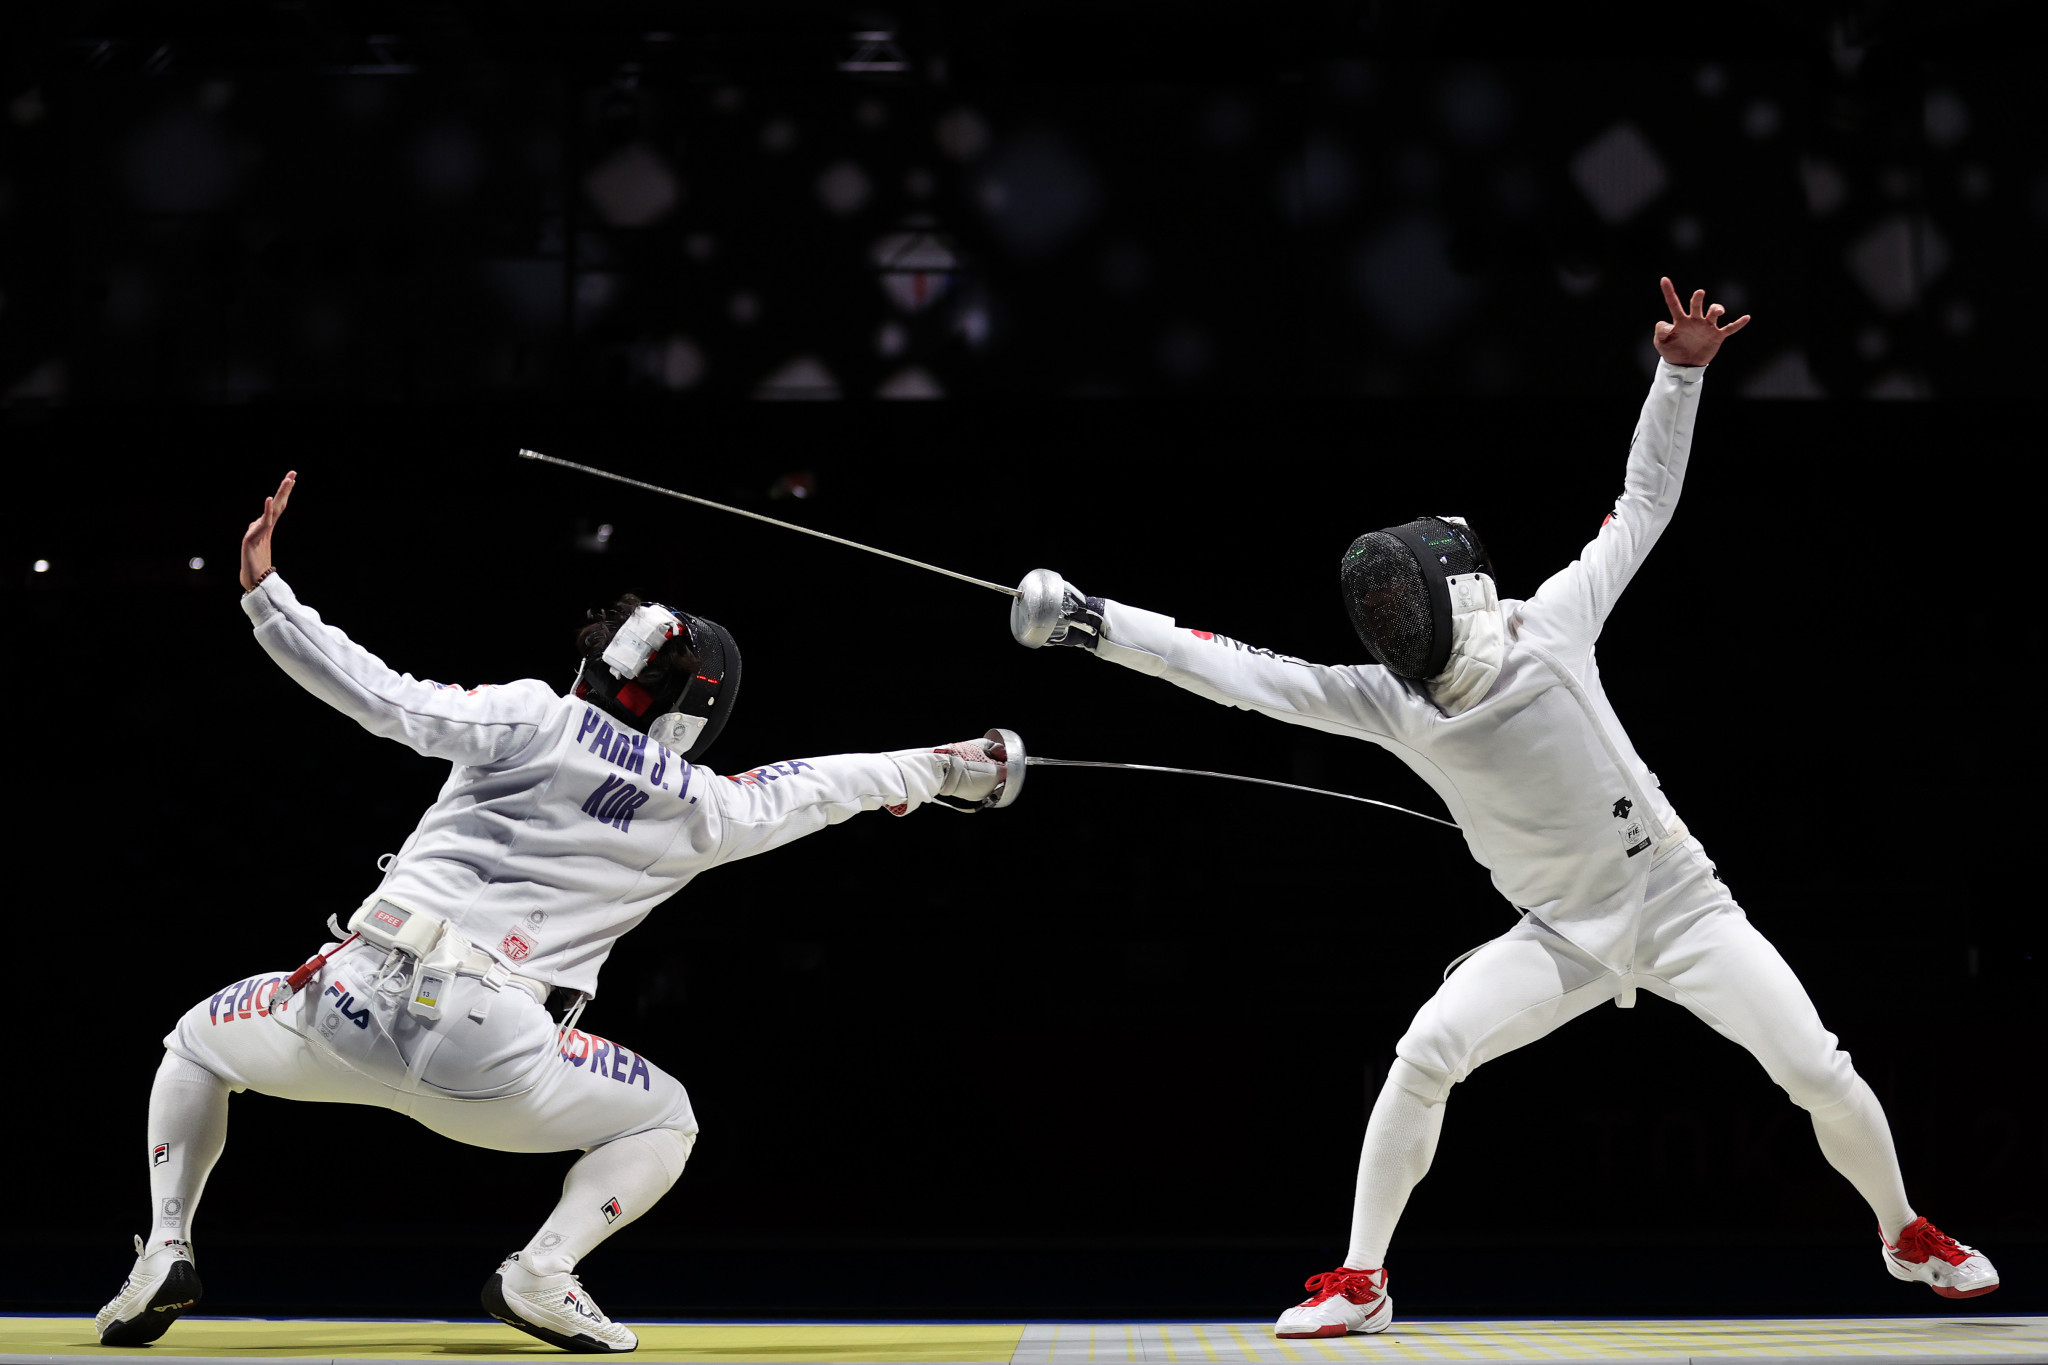 Koki Kano, right, won gold in the men's épée tournament at the Asian Fencing Championships ©Getty Images